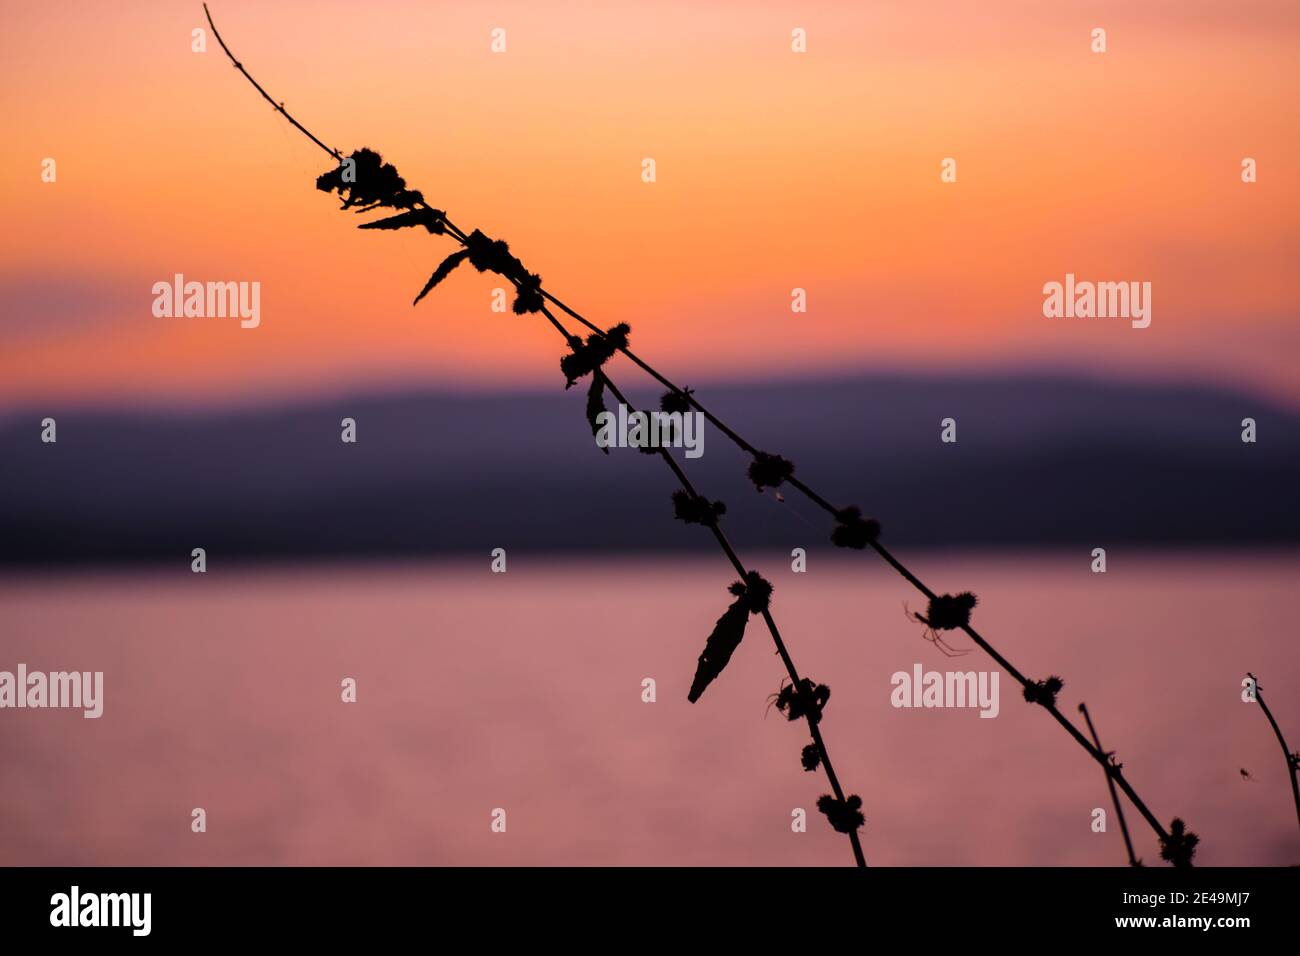 Silhouette of grass during colorful evening after sunset with blurry background. Stock Photo